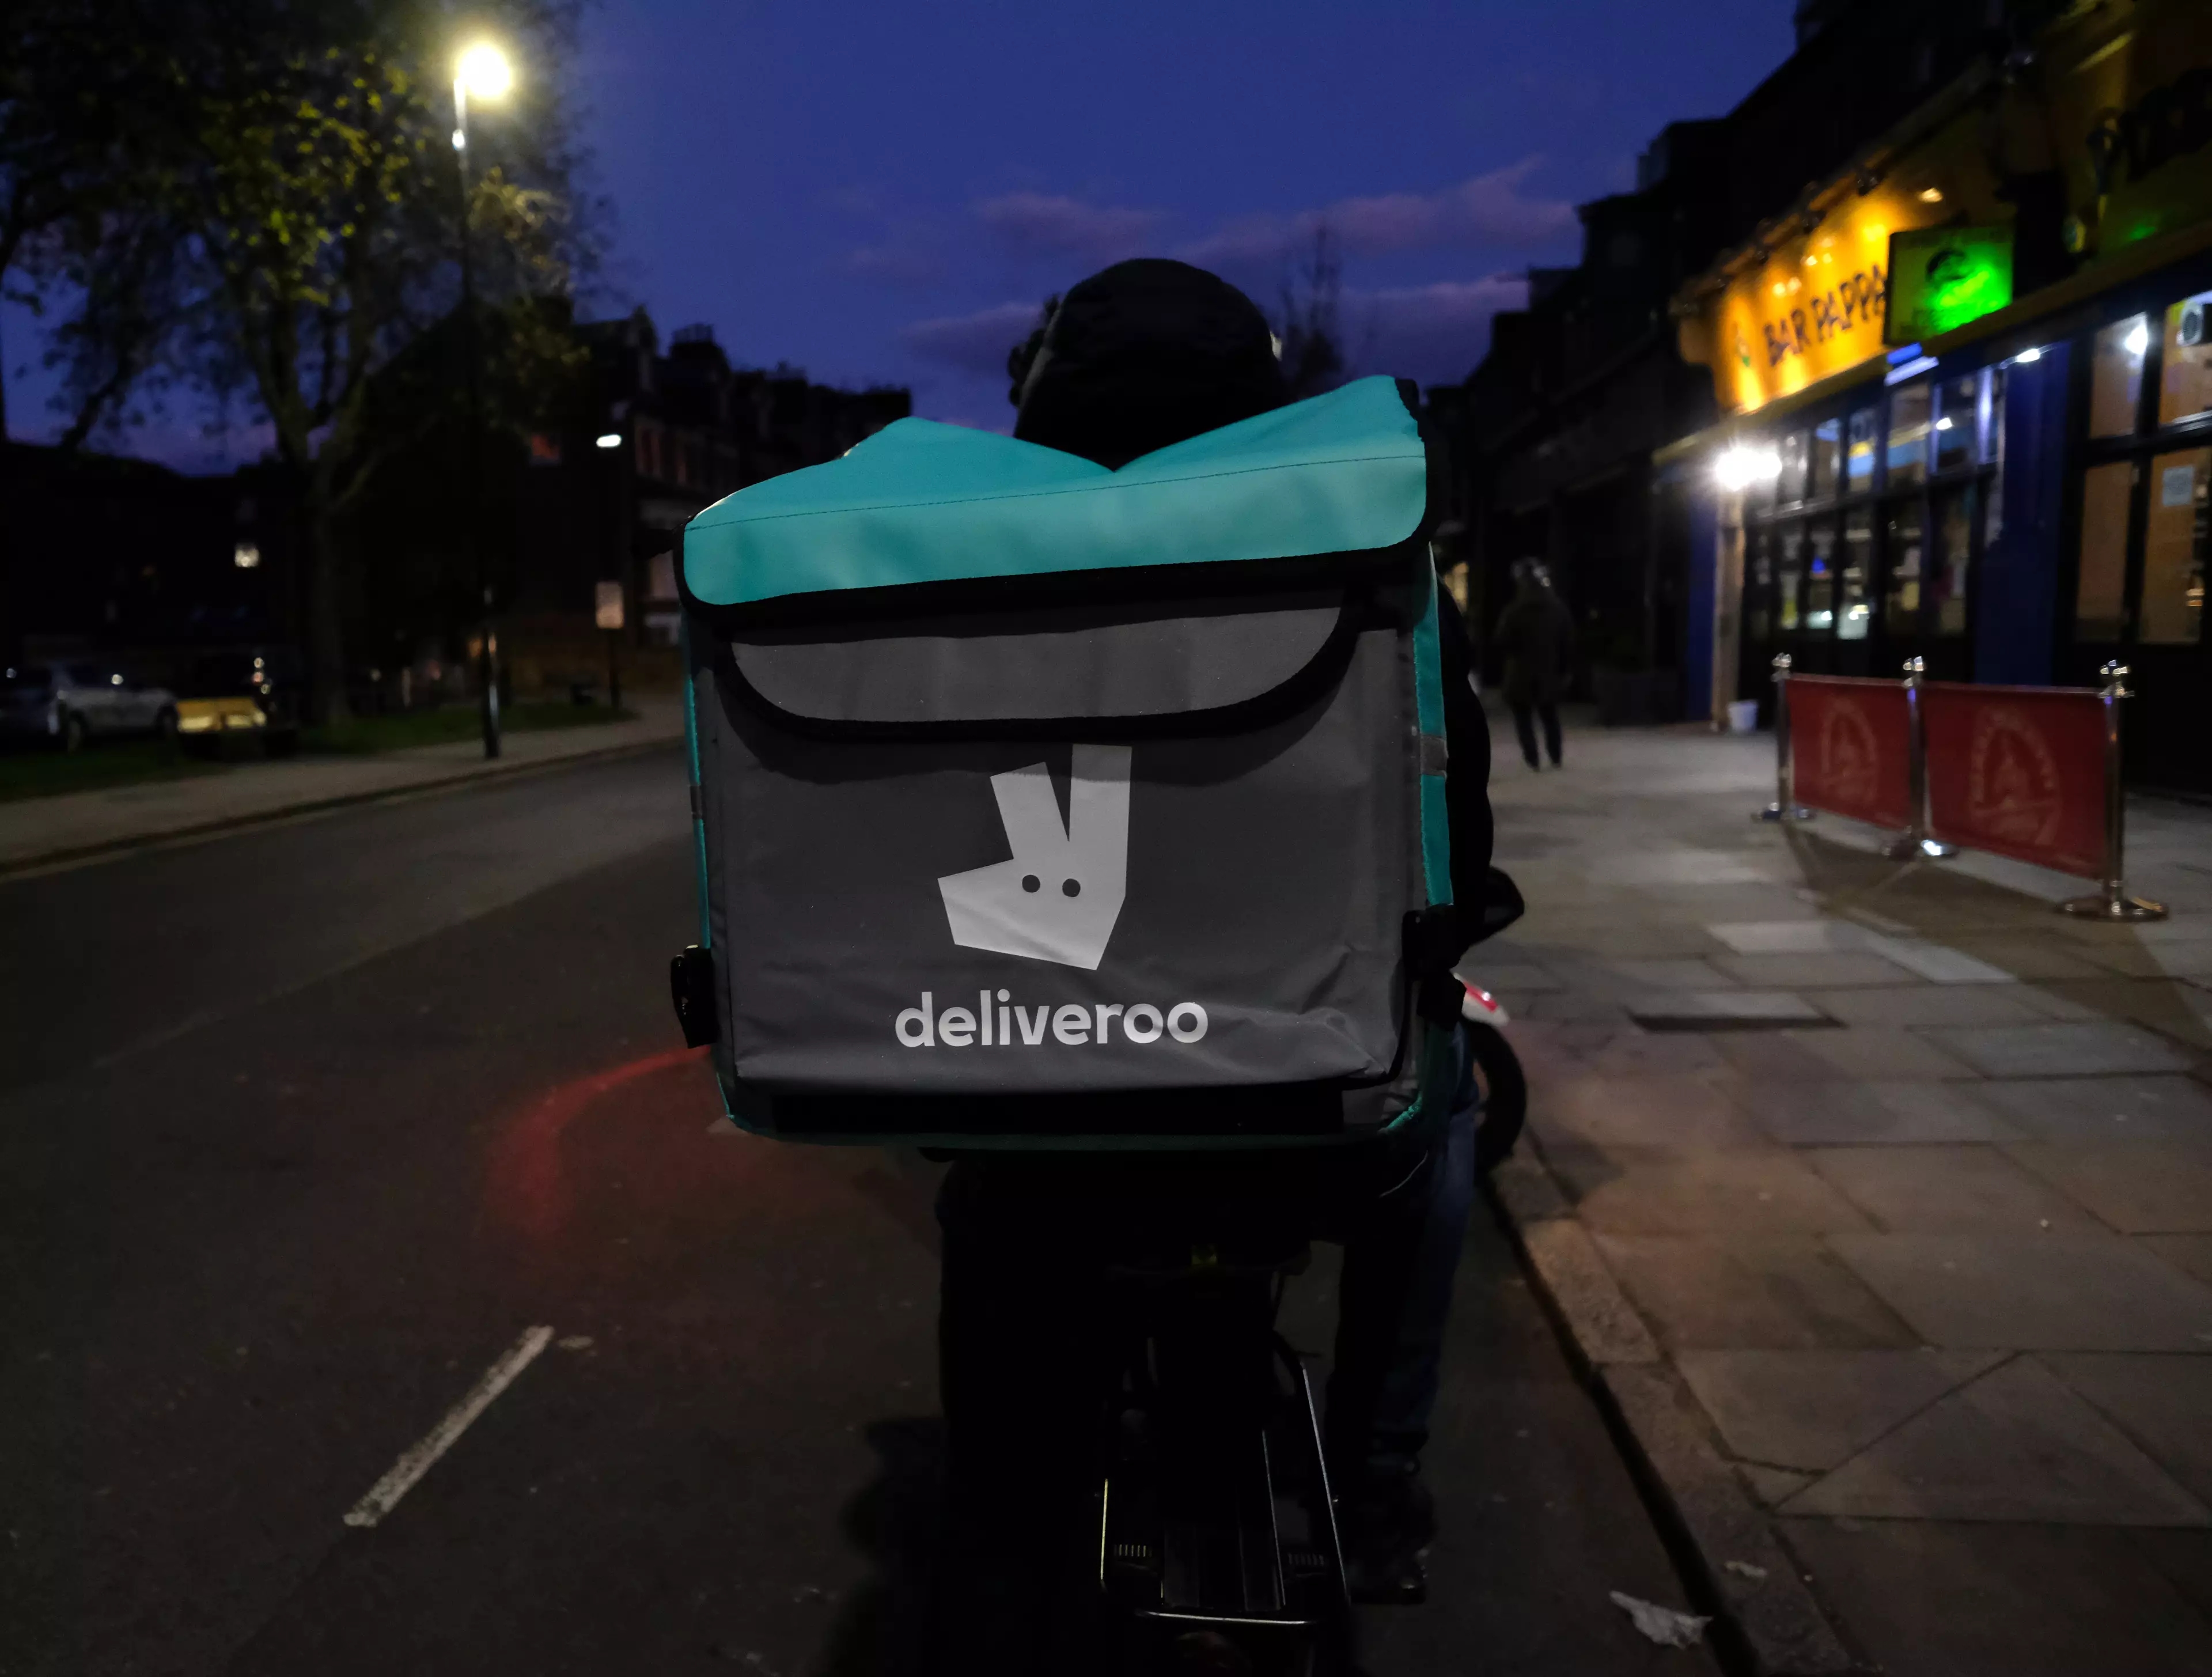 KFC has teamed up with Deliveroo (